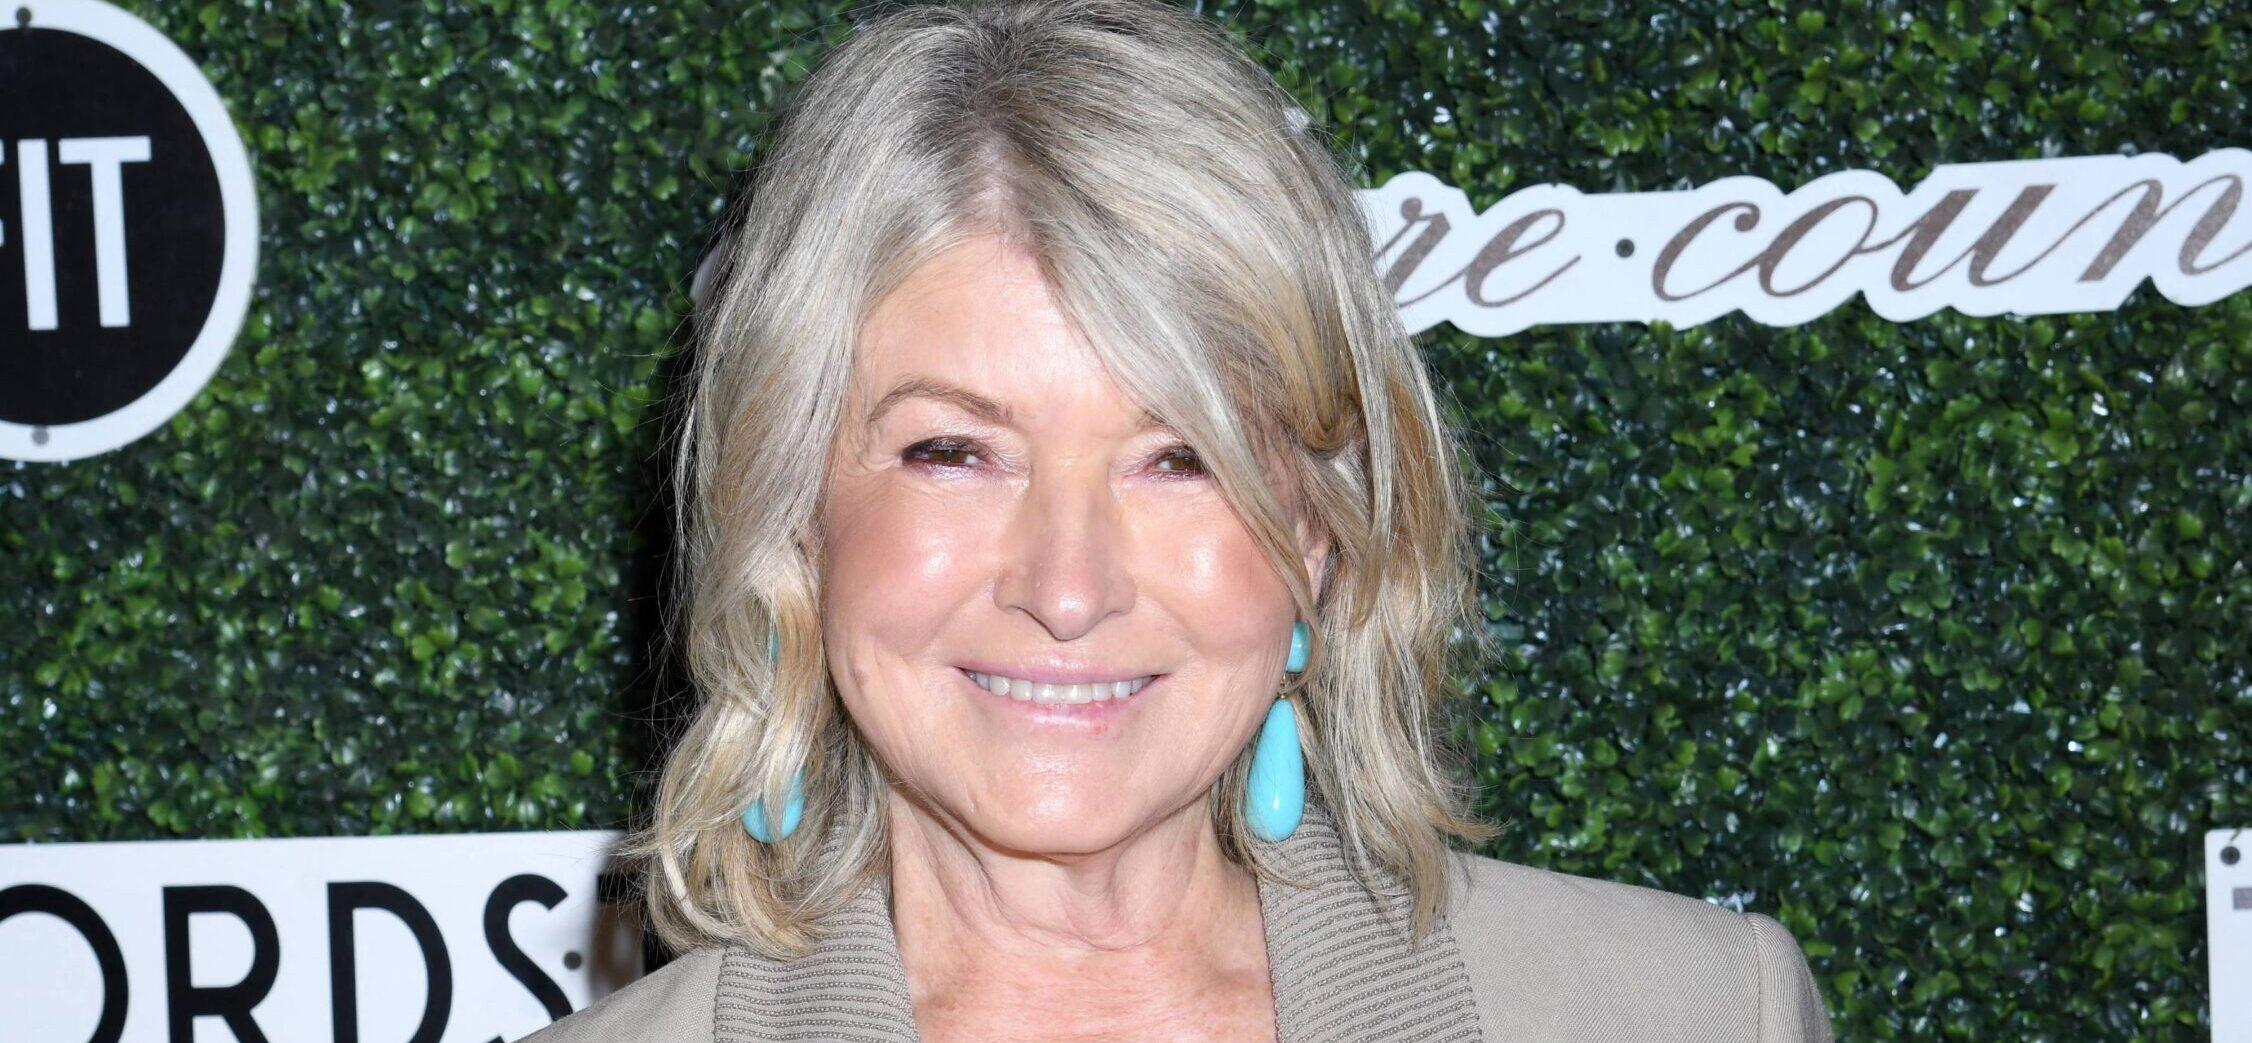 Fans Think Martha Stewart Is High After She Makes Mistake During Kentucky Derby ‘Rider’s Up’